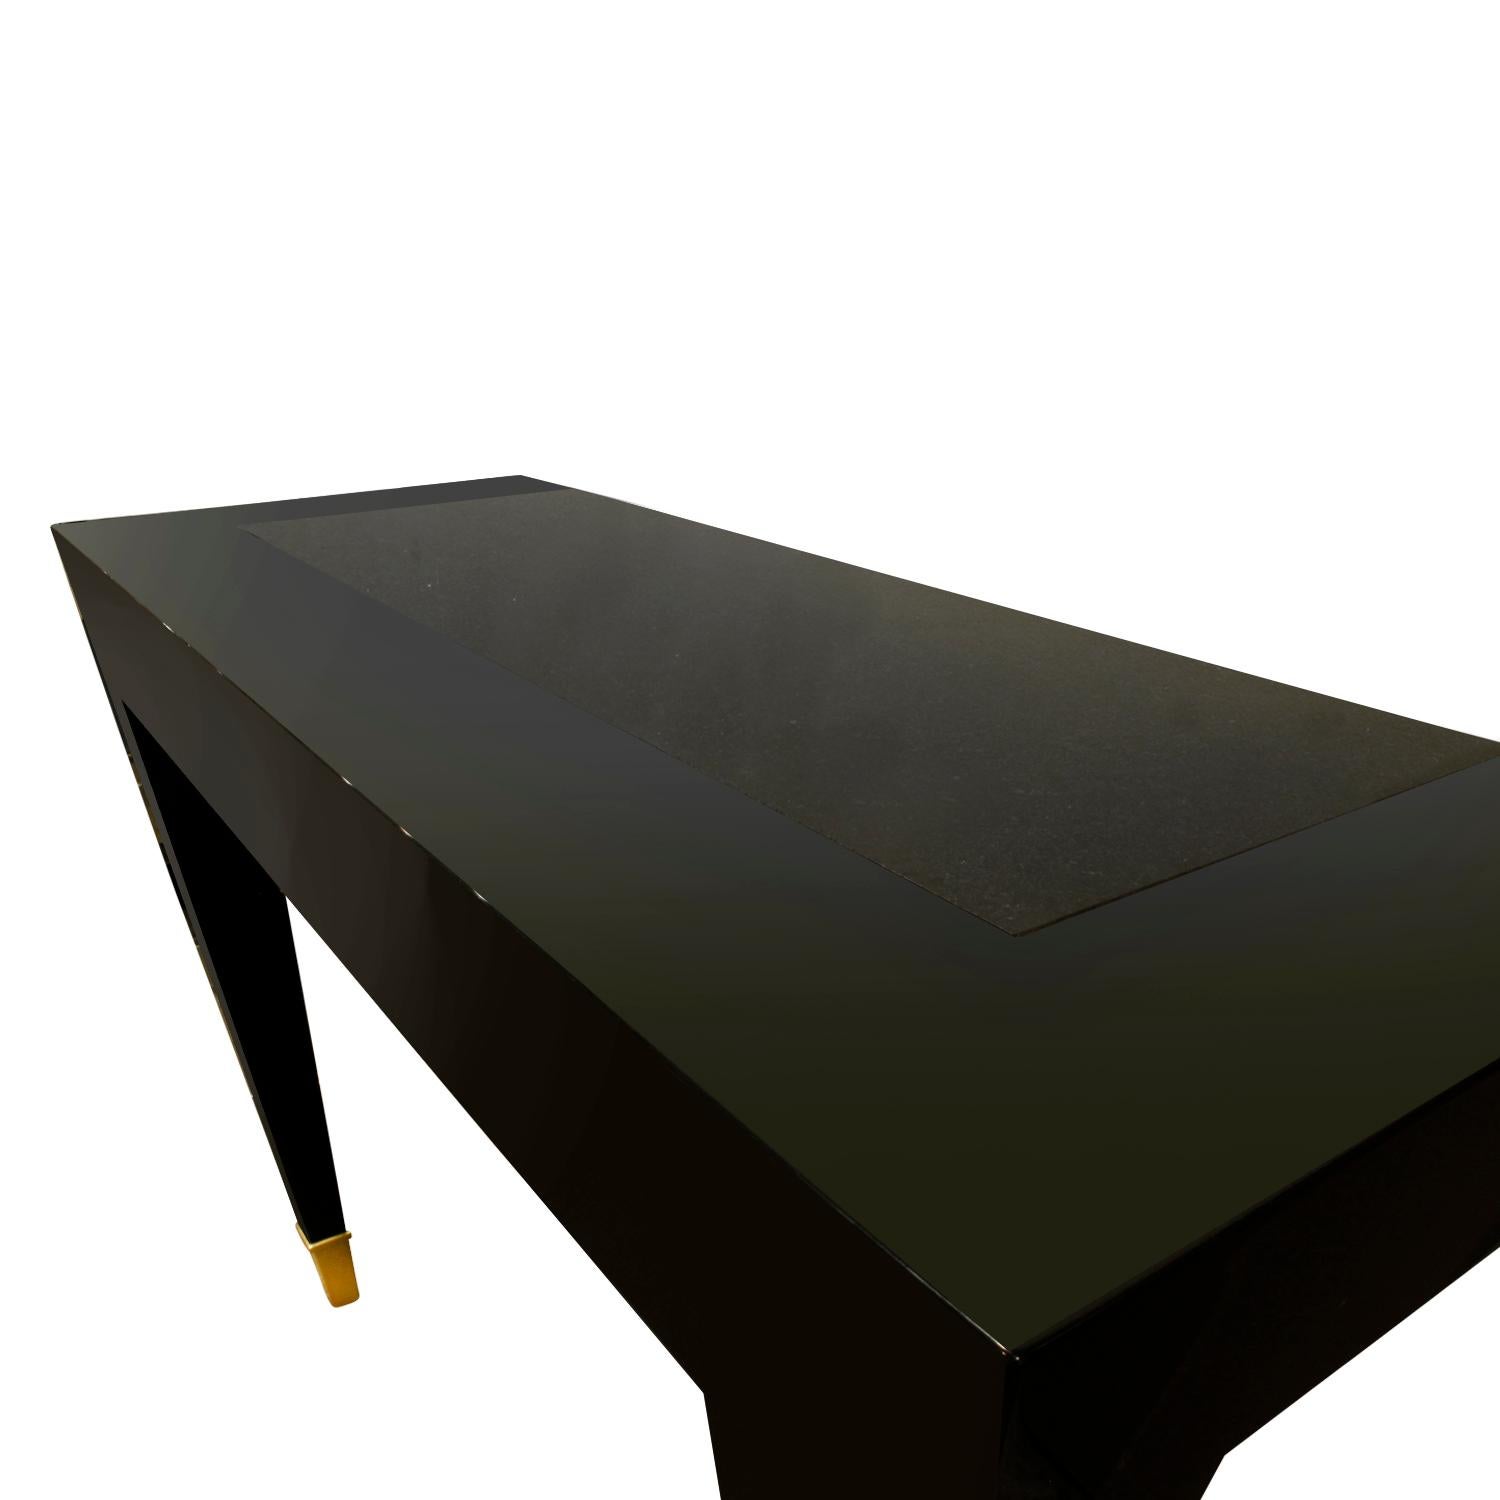 Hand-Crafted Pace Black Lacquer Console Table with Inset Granite Top and Brass Sabots, 1980s For Sale